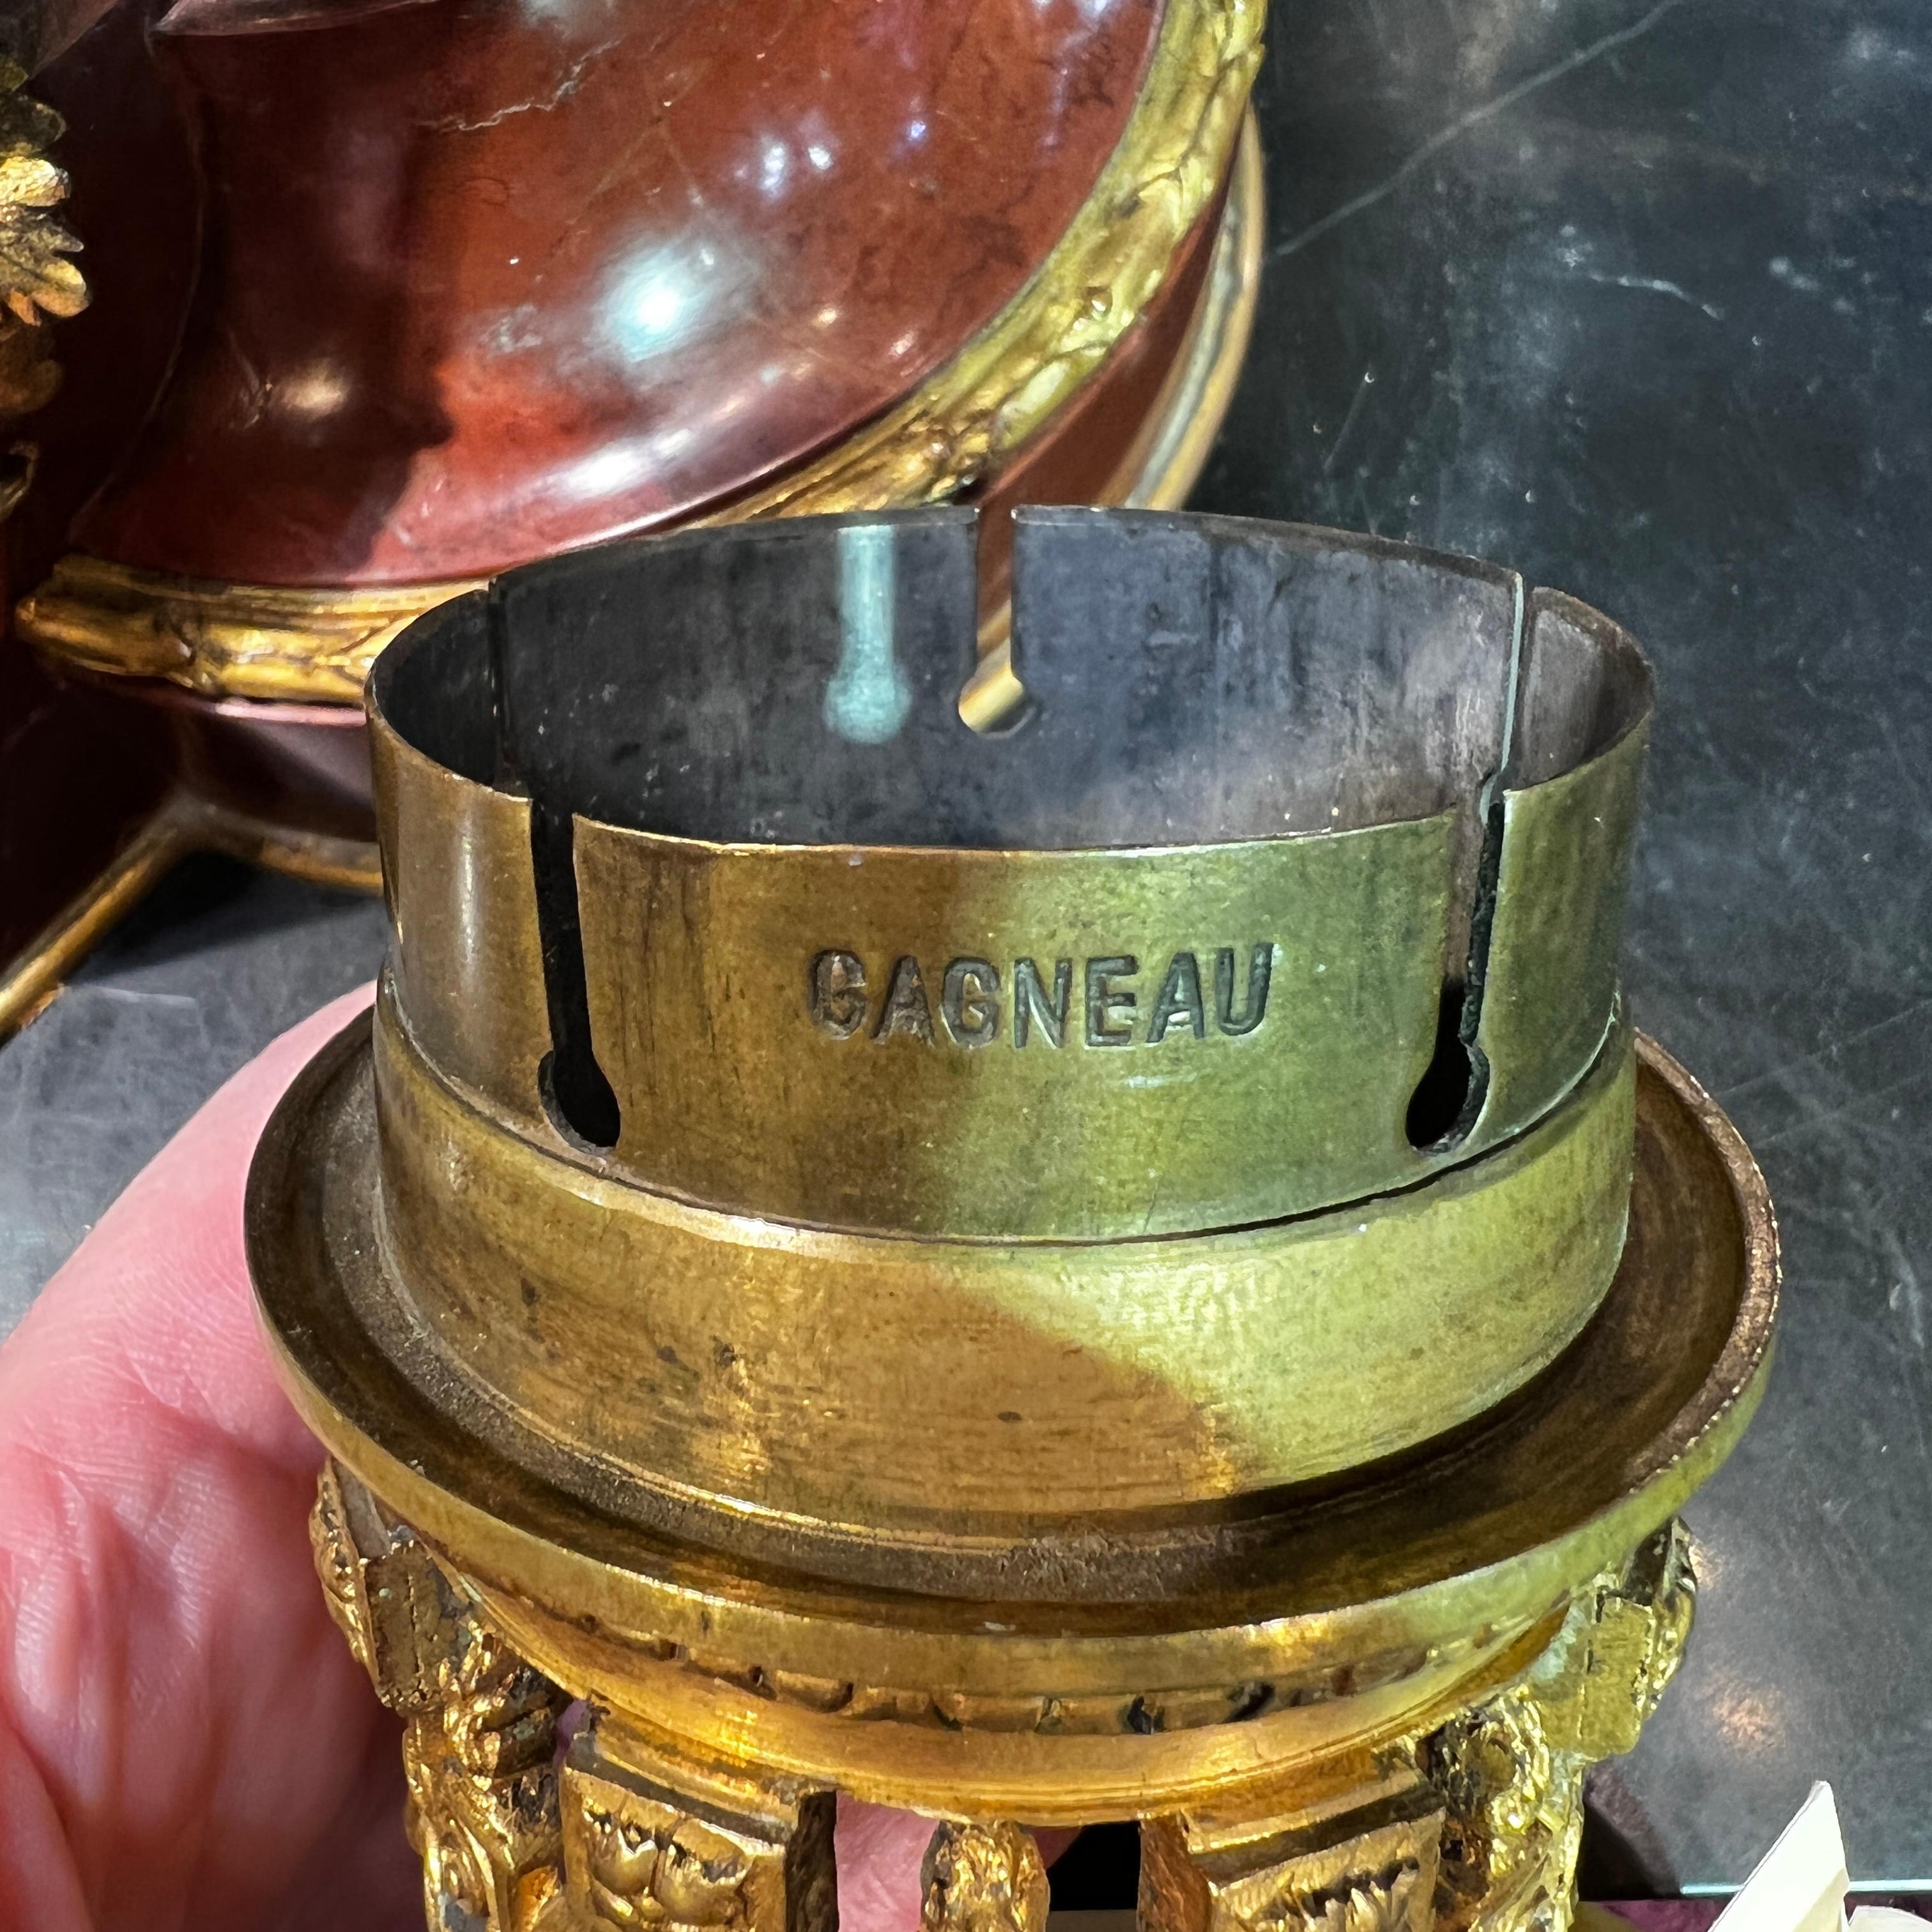 French Ormolu and Patinated Bronze-Mounted Marble Vases with Covers by Gagneau For Sale 5